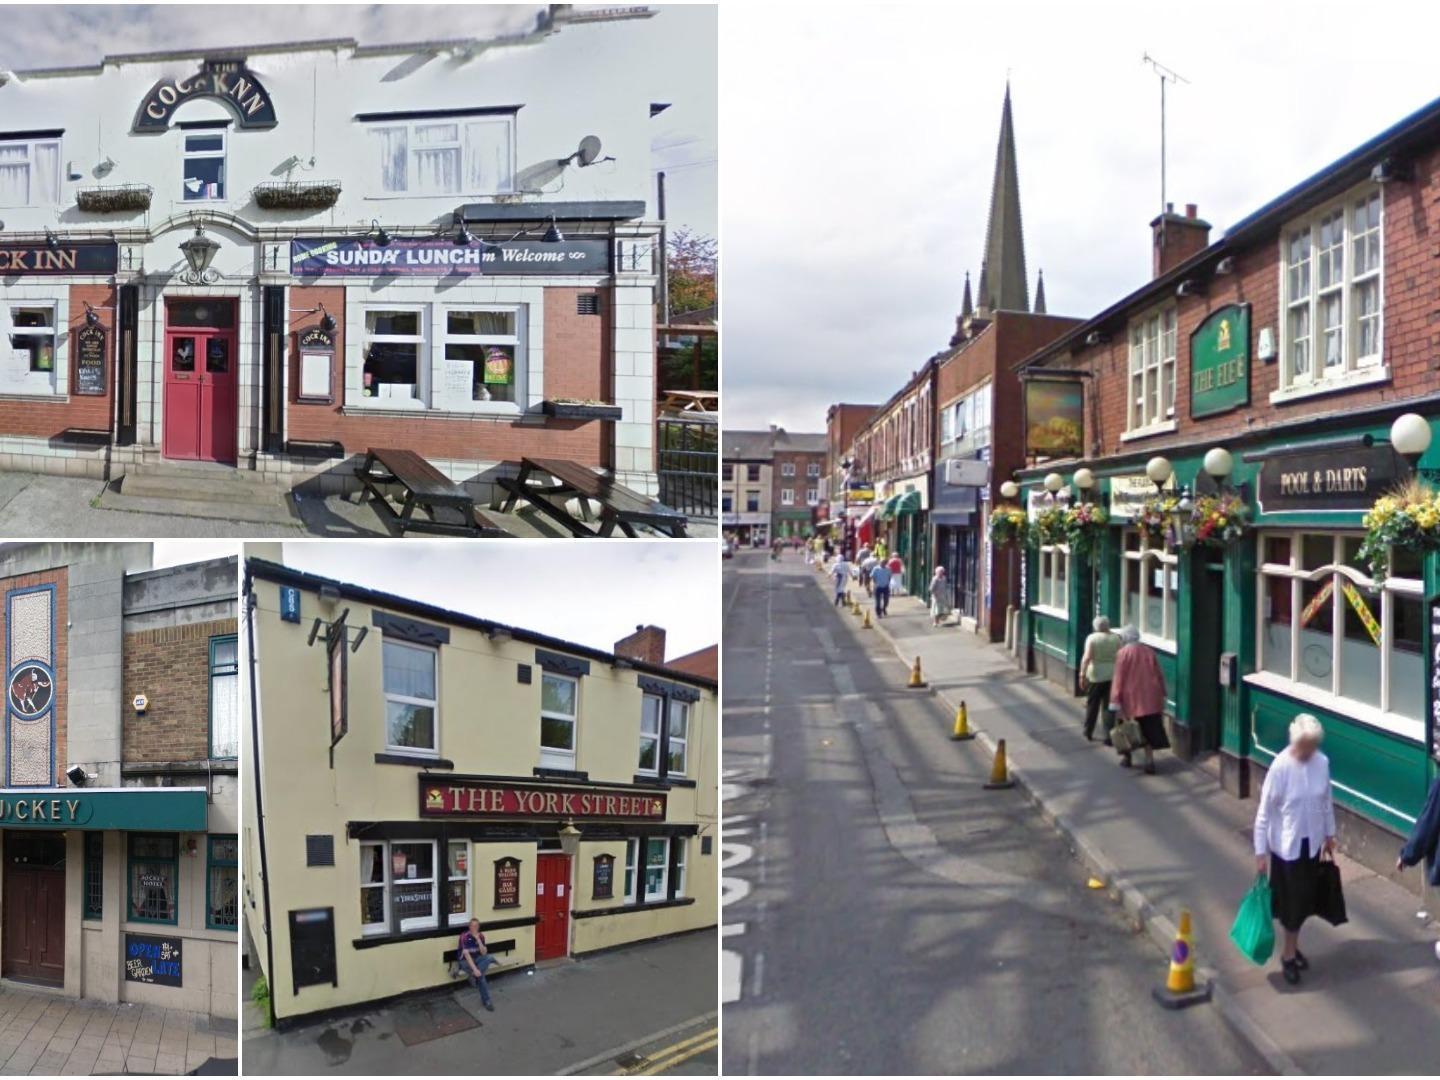 Do you remember these pubs?